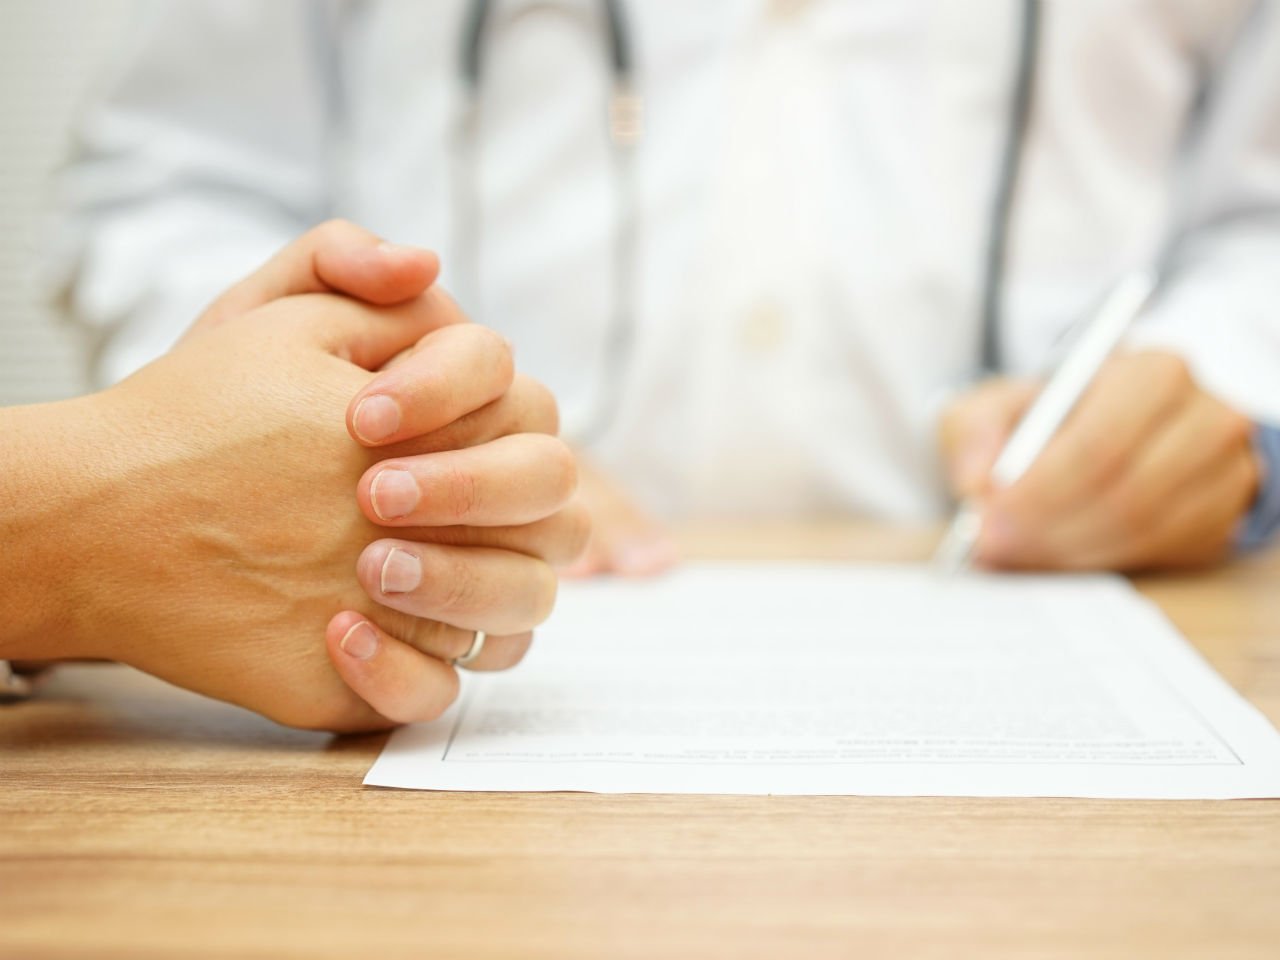 Hands clasped in front of a doctor with a medical form